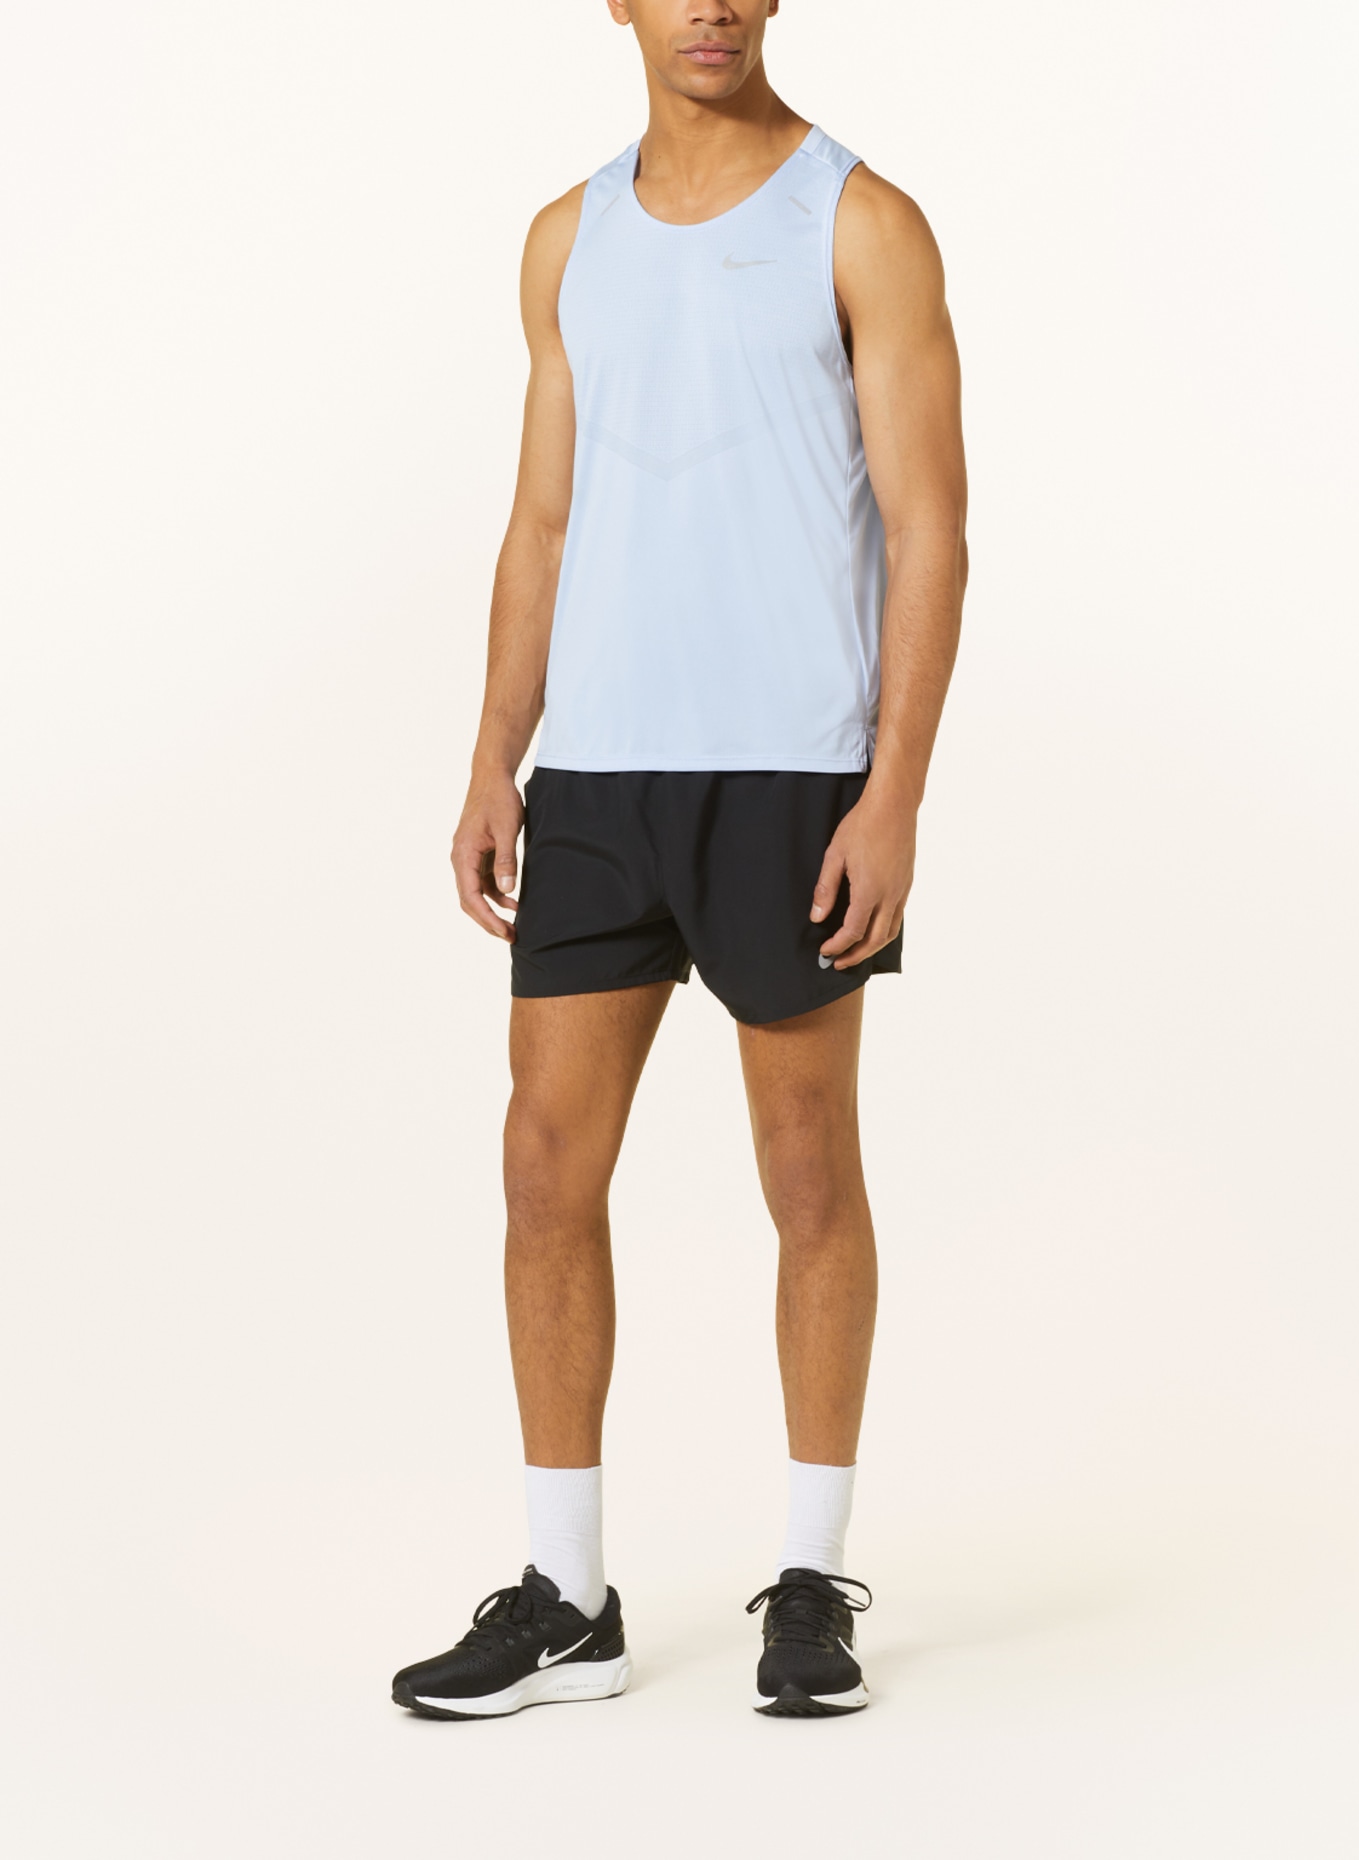 Nike Running top RISE 365, Color: LIGHT BLUE (Image 2)